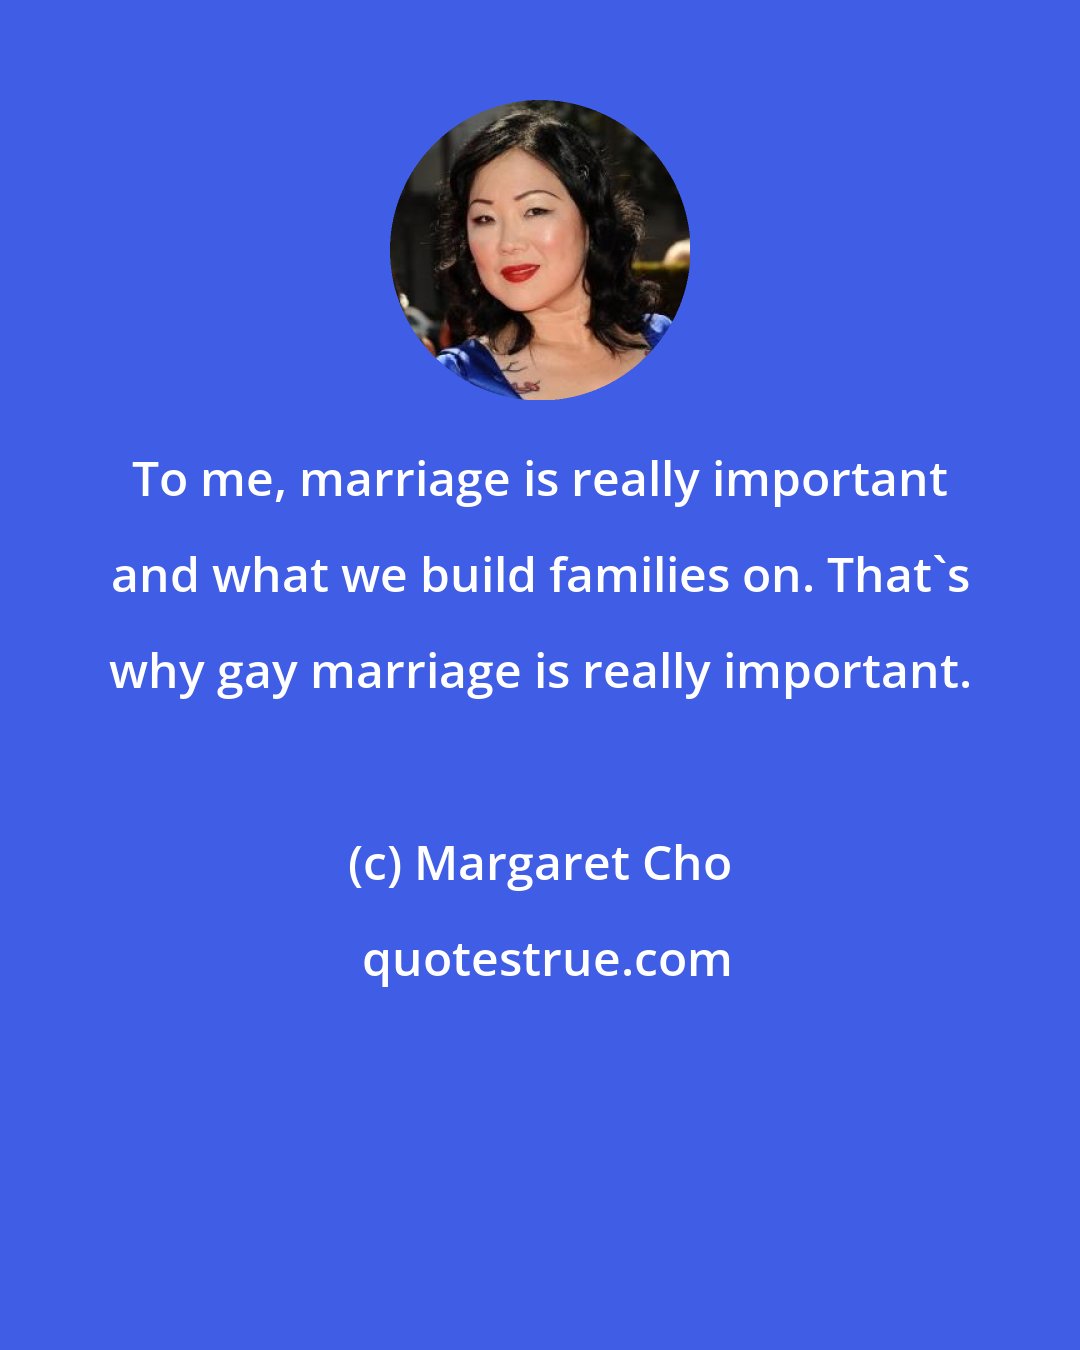 Margaret Cho: To me, marriage is really important and what we build families on. That's why gay marriage is really important.